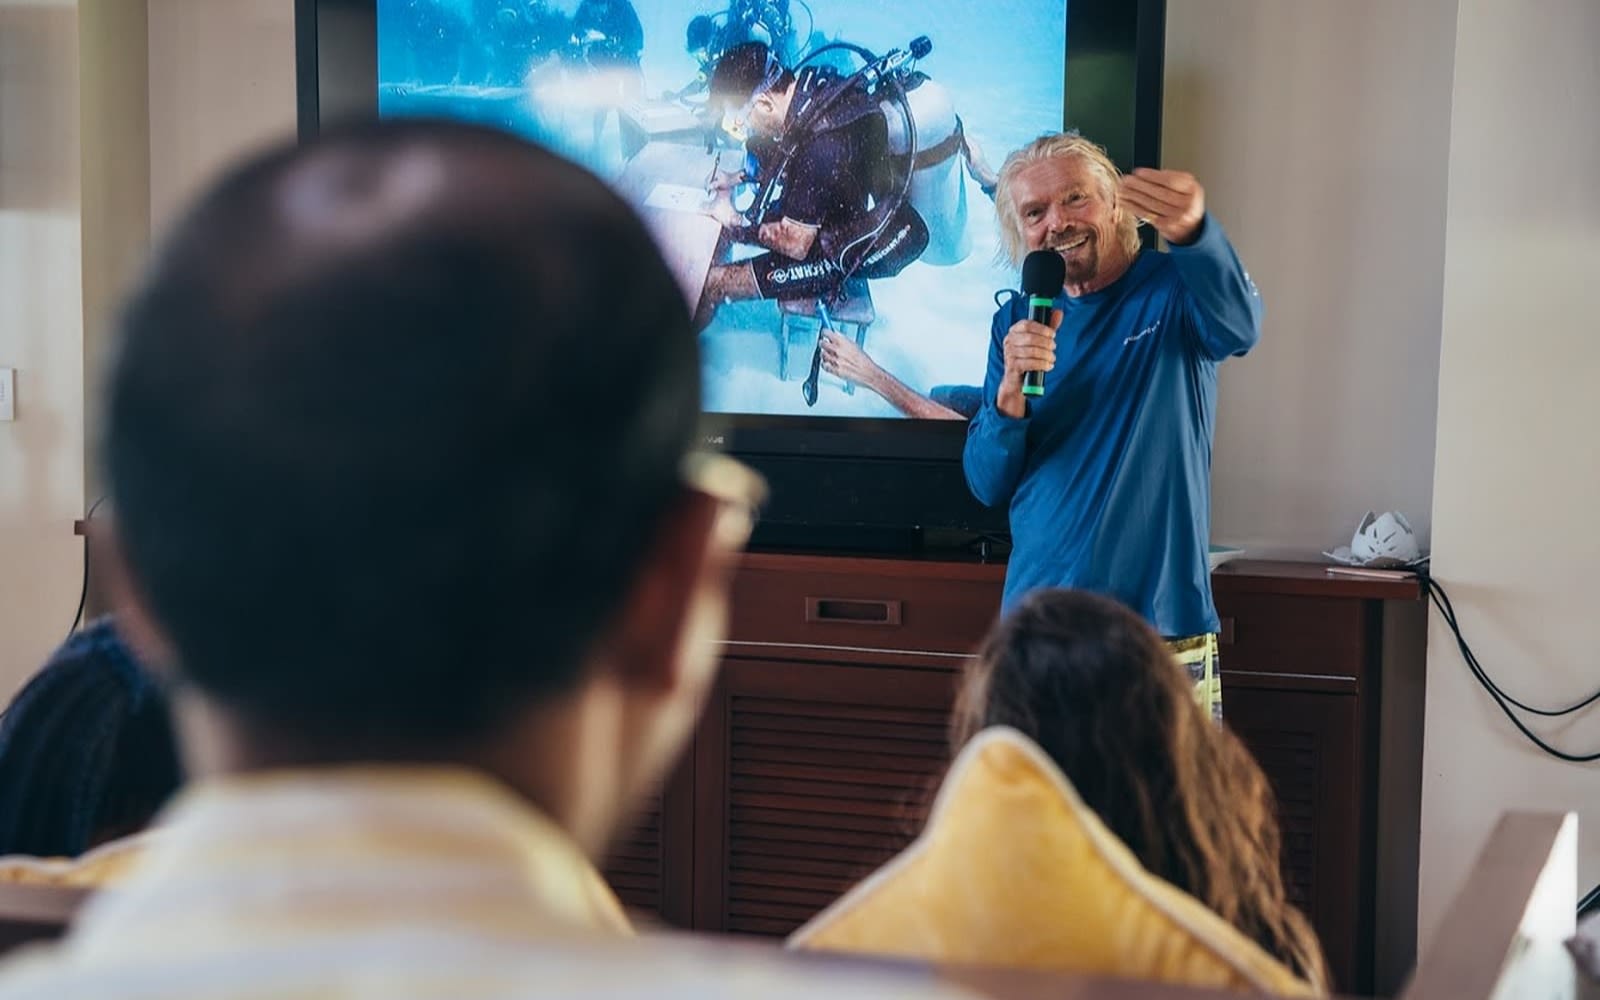 Richard Branson in blue shirt speaking into mic in front of a TV